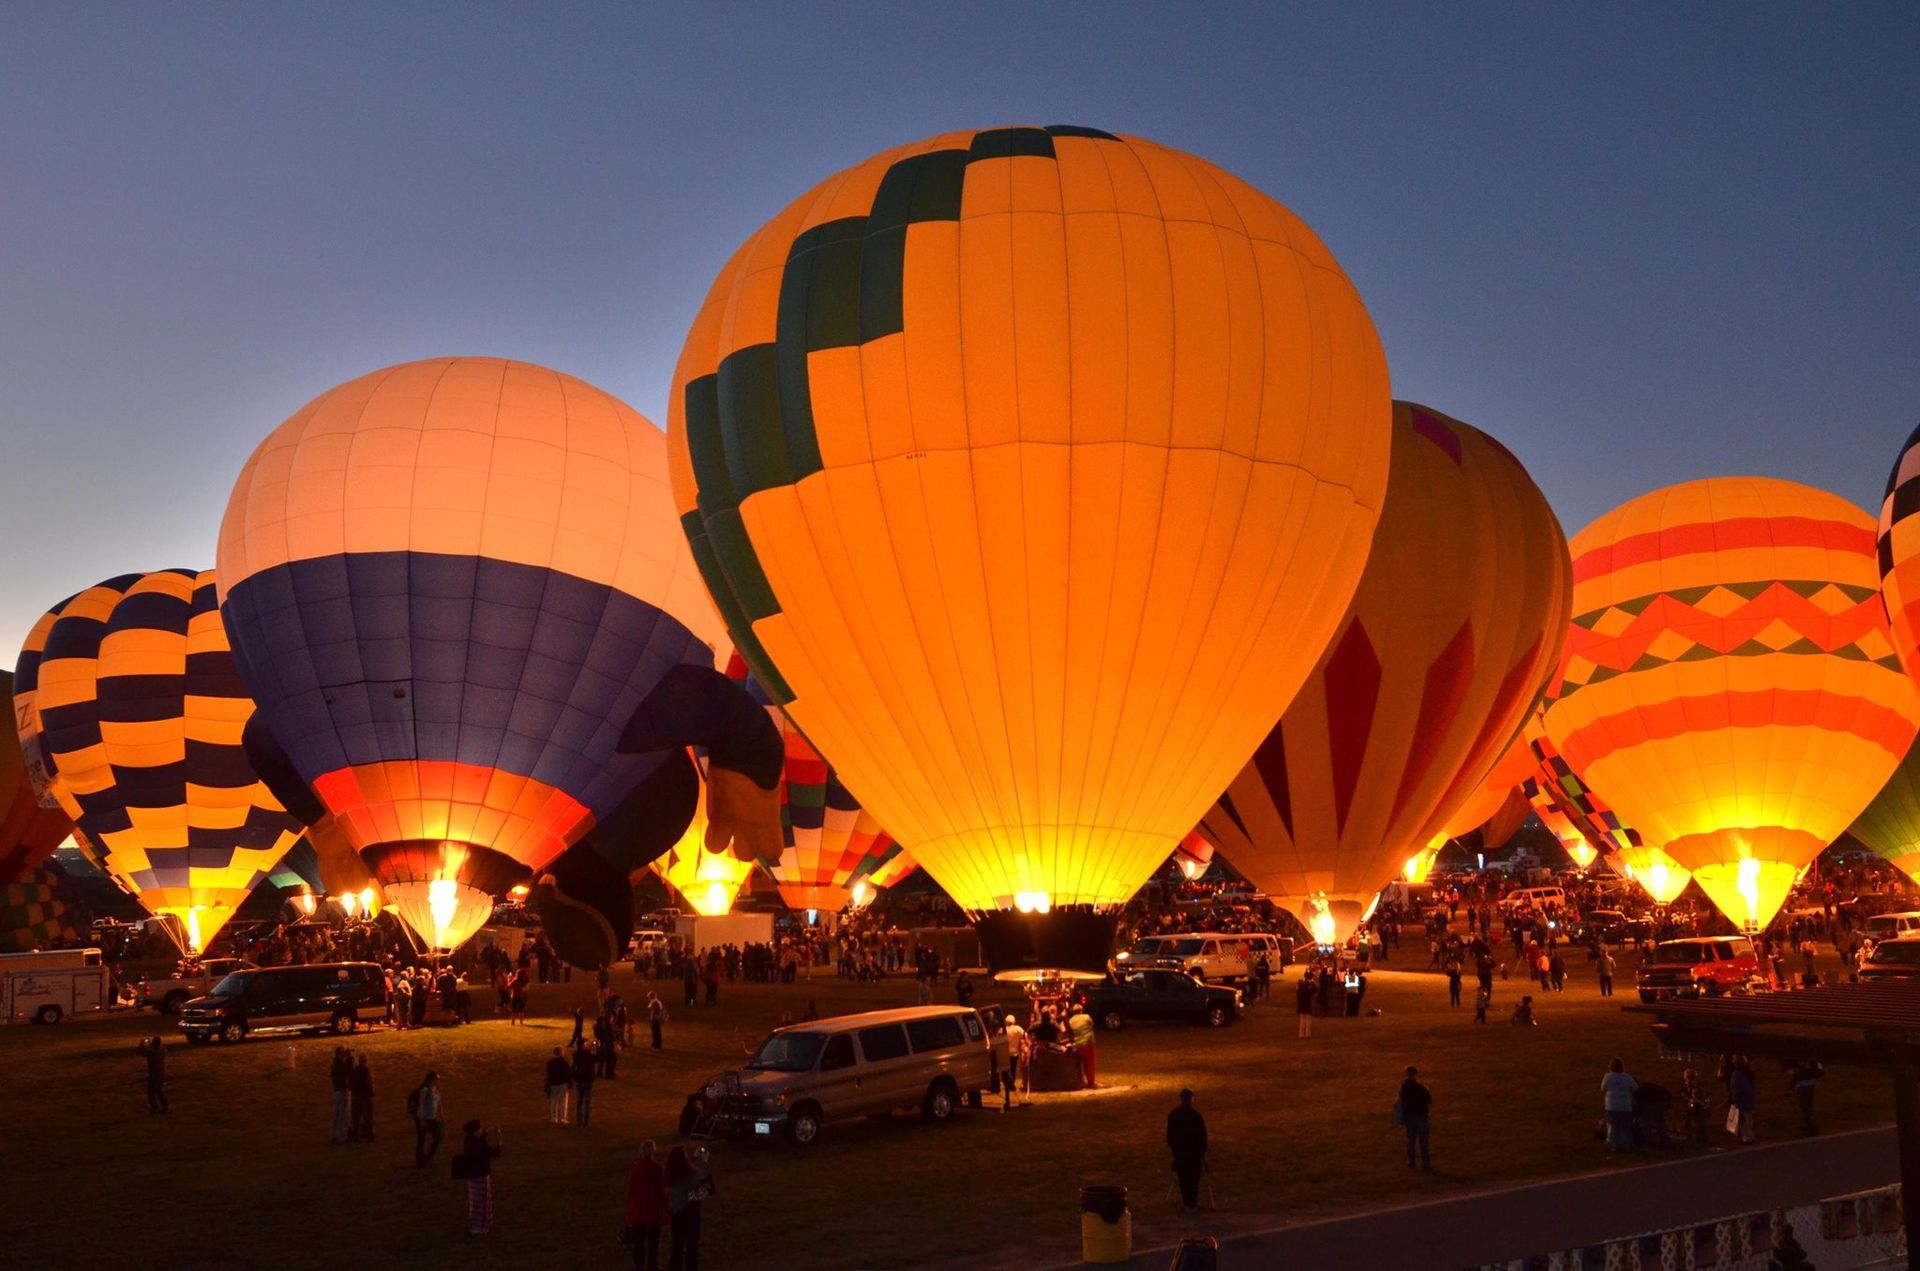 World's Largest Hot Air Balloon Festival, world record in Albuquerque, New Mexico
